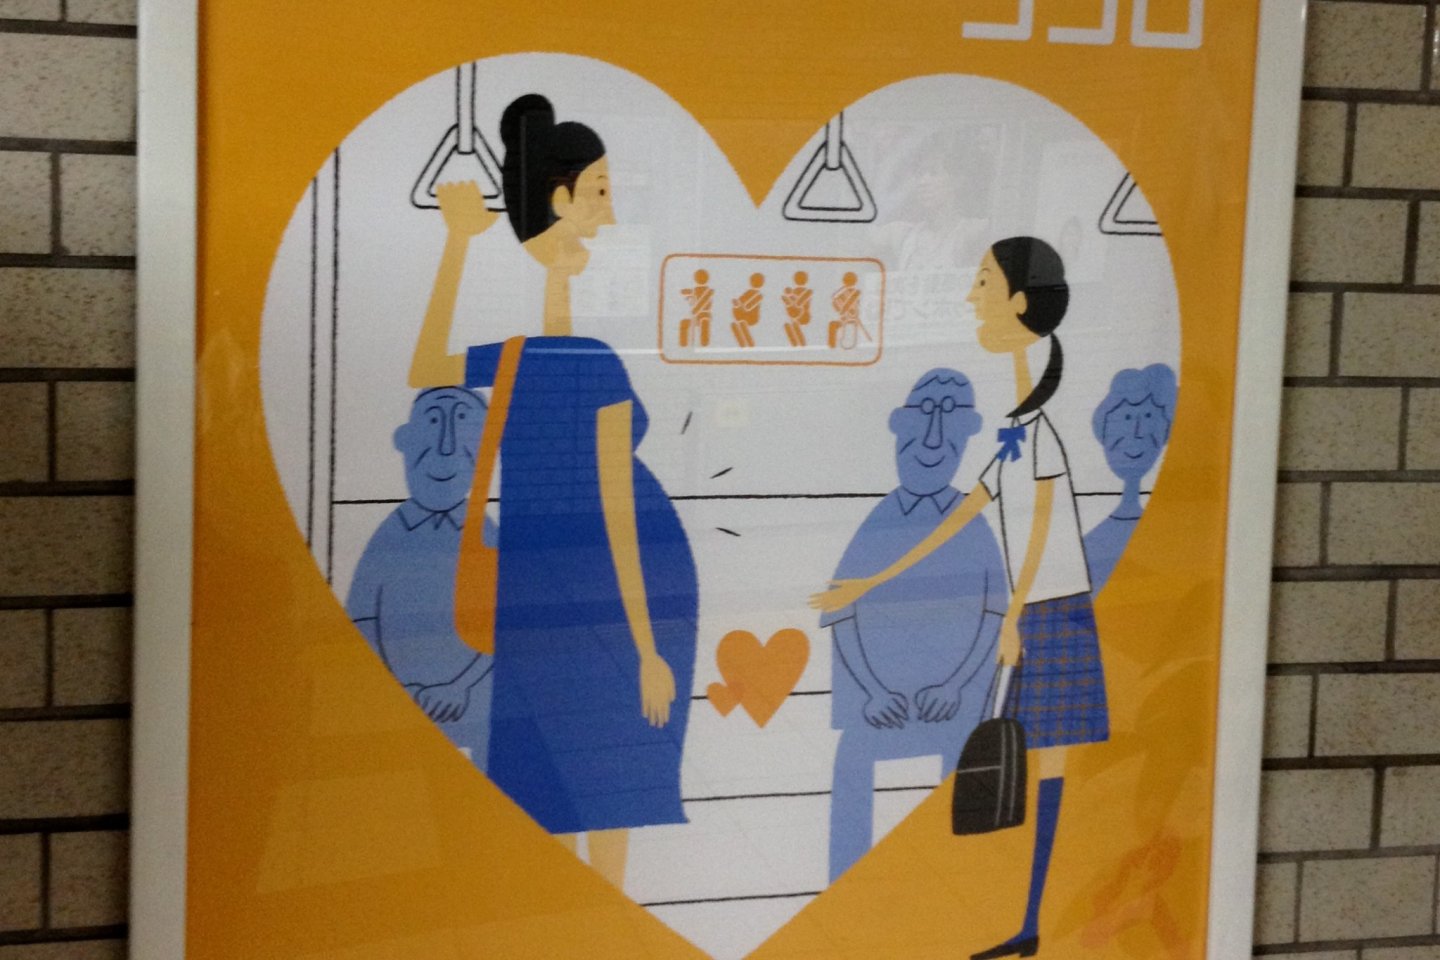 Cute signs reminding passengers of essential etiquette